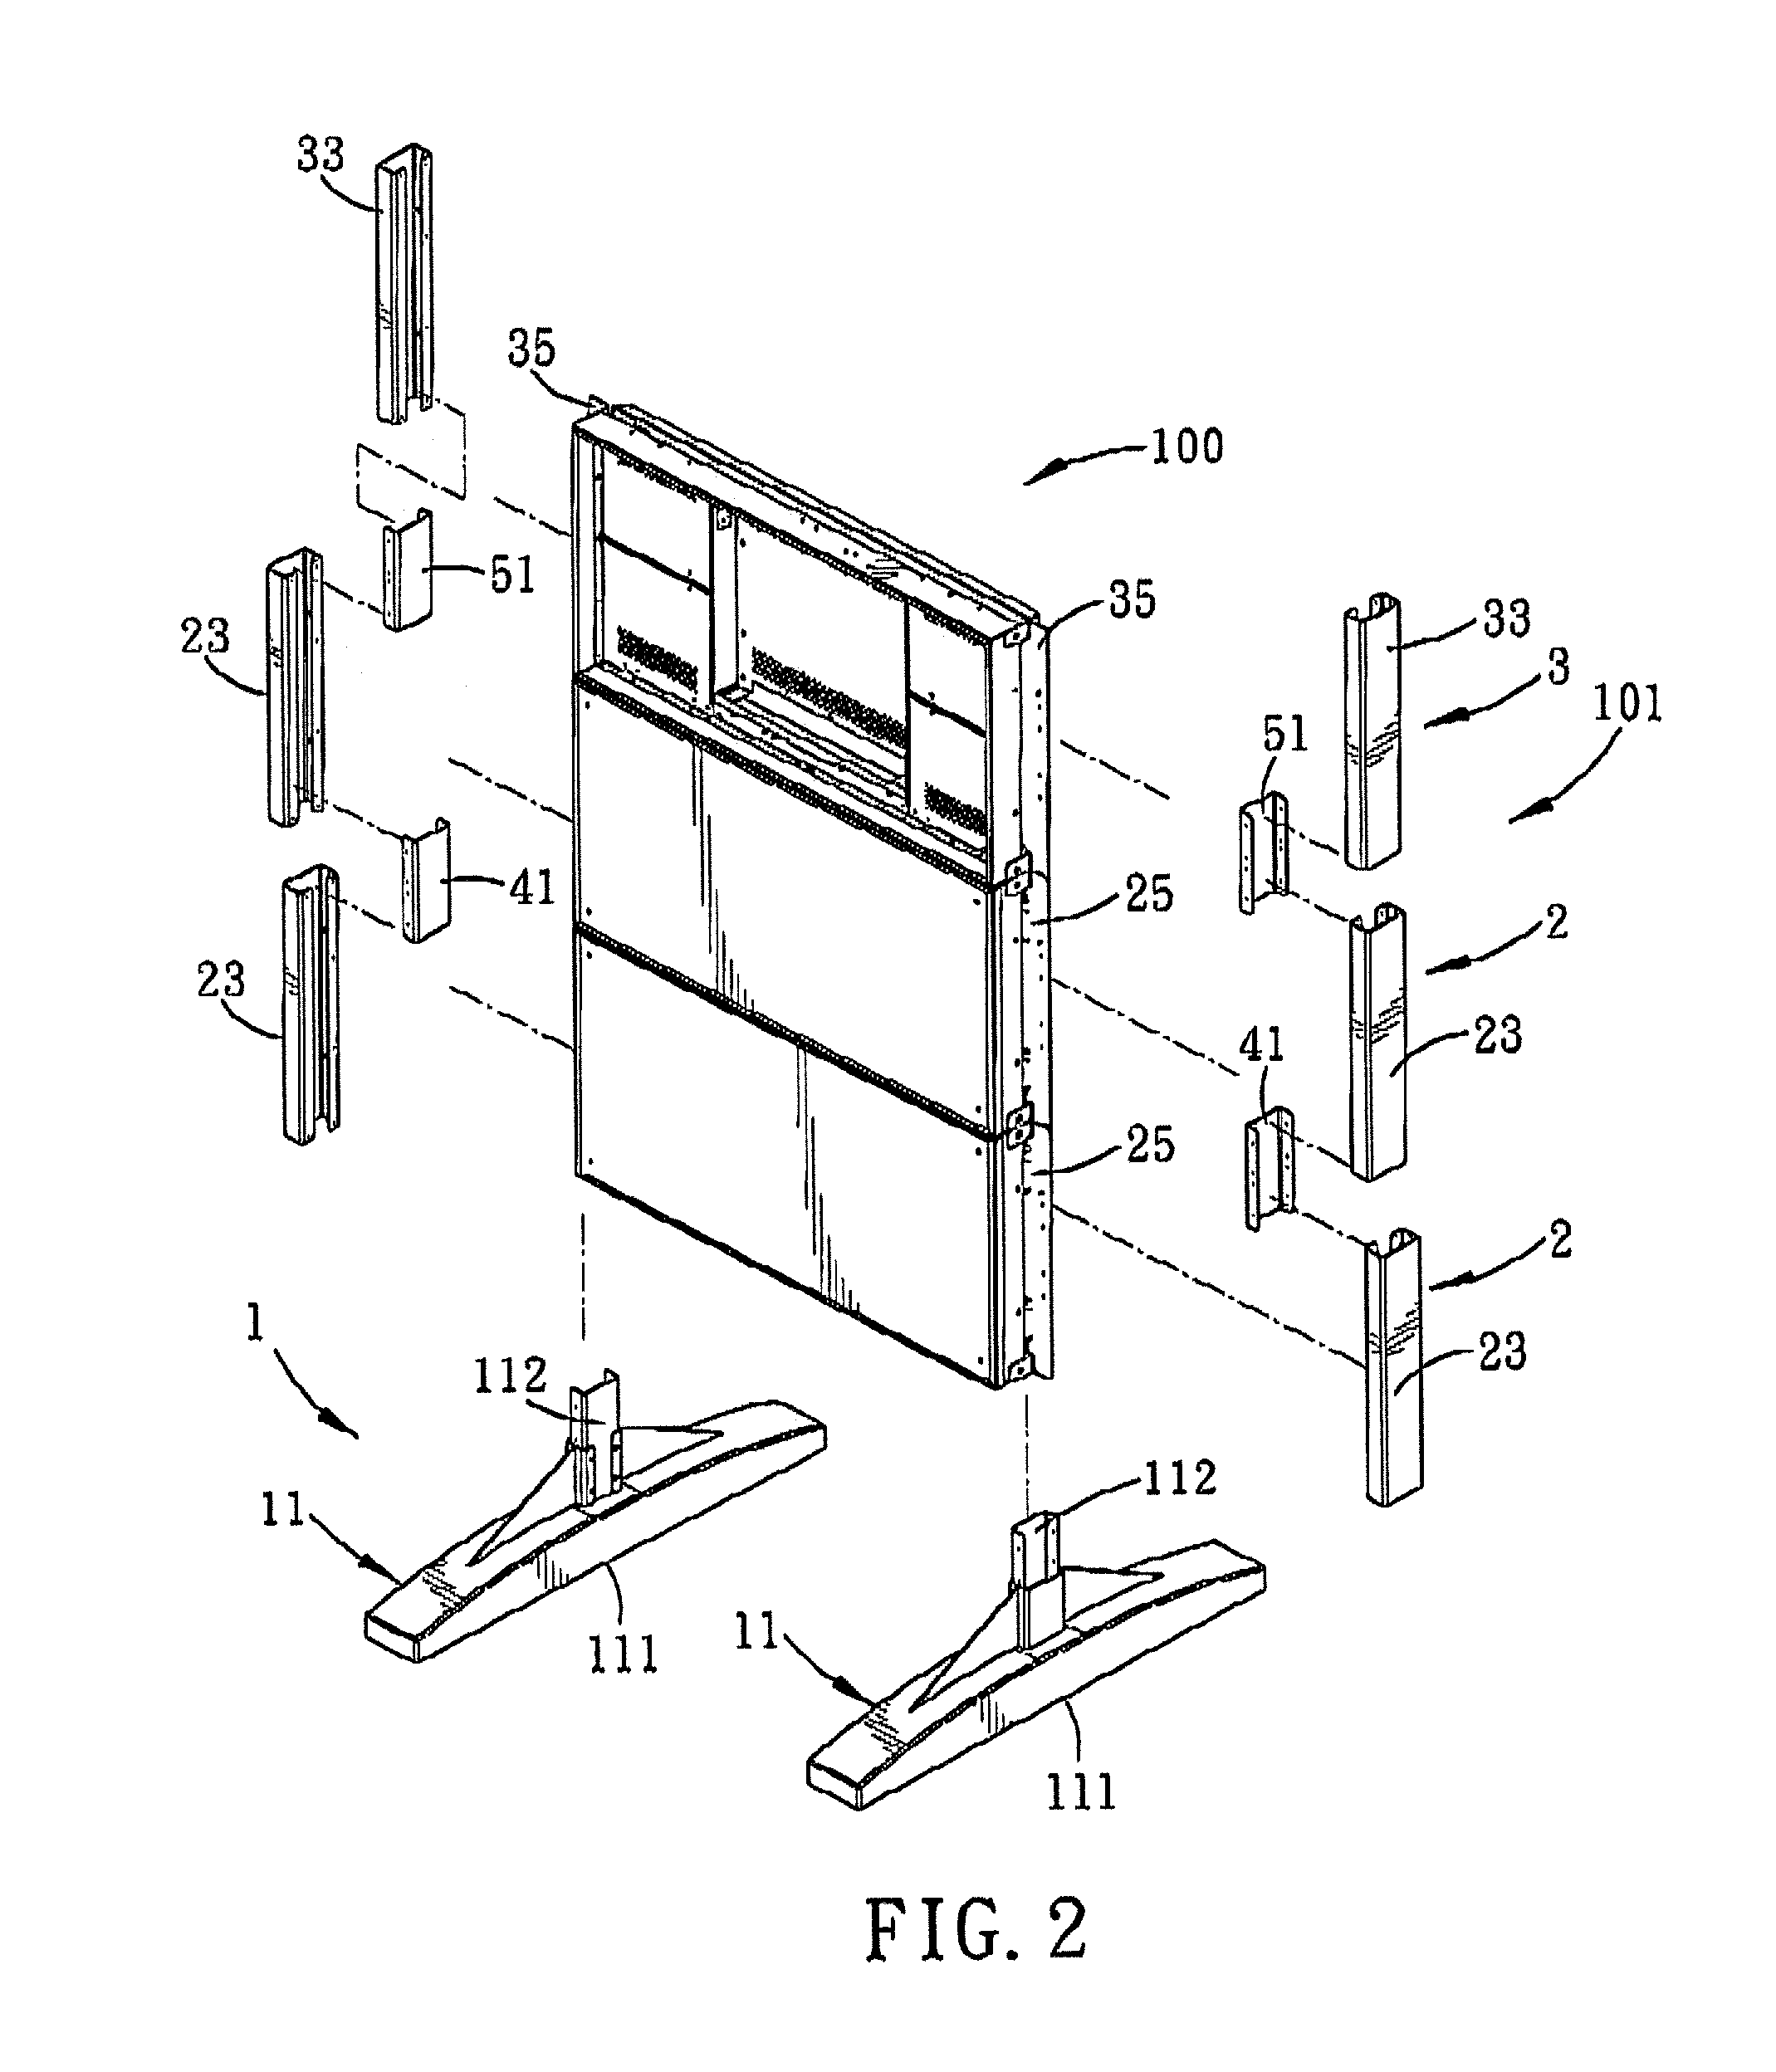 Modular display device having at least one display unit